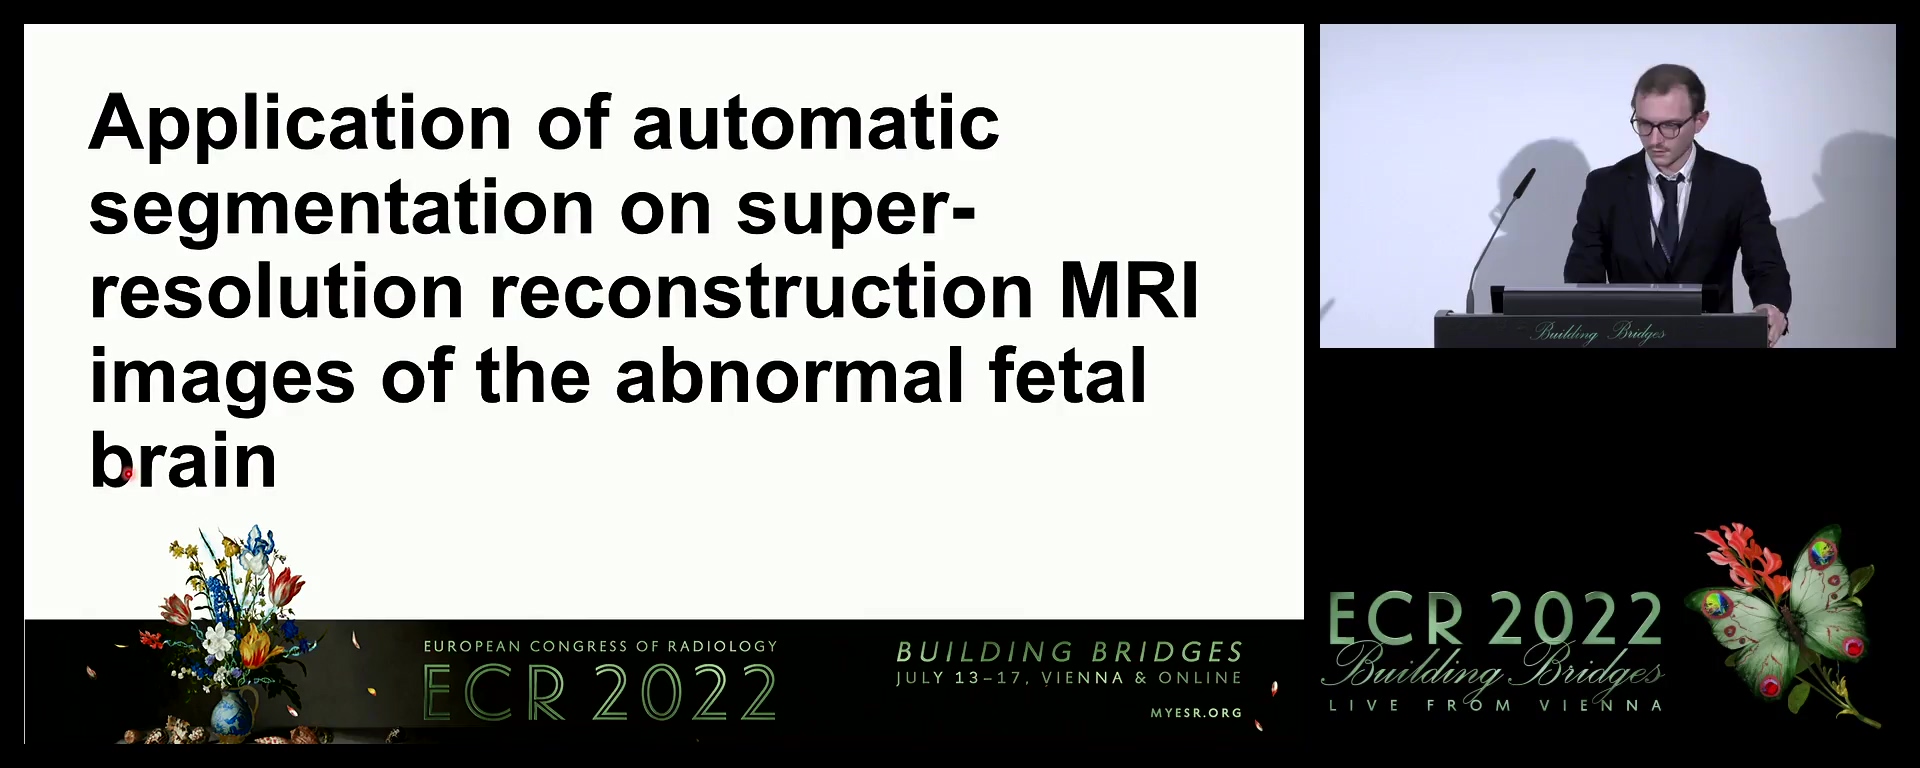 Application of automatic segmentation on super-resolution reconstruction MRI images of the abnormal fetal brain - Thomas Deprest, Aalst / BE